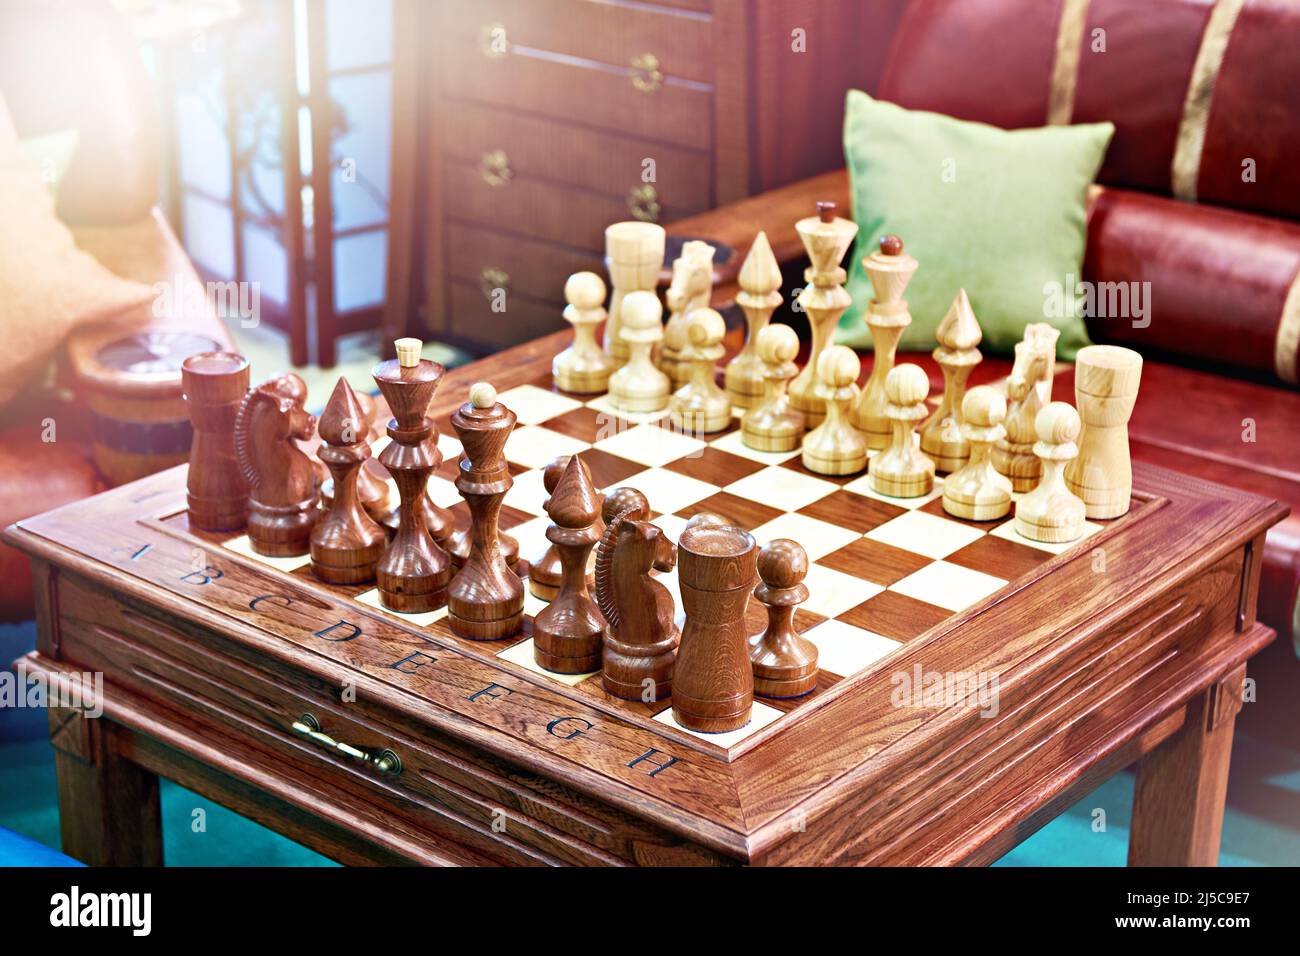 Chess on a vintage wooden table Stock Photo